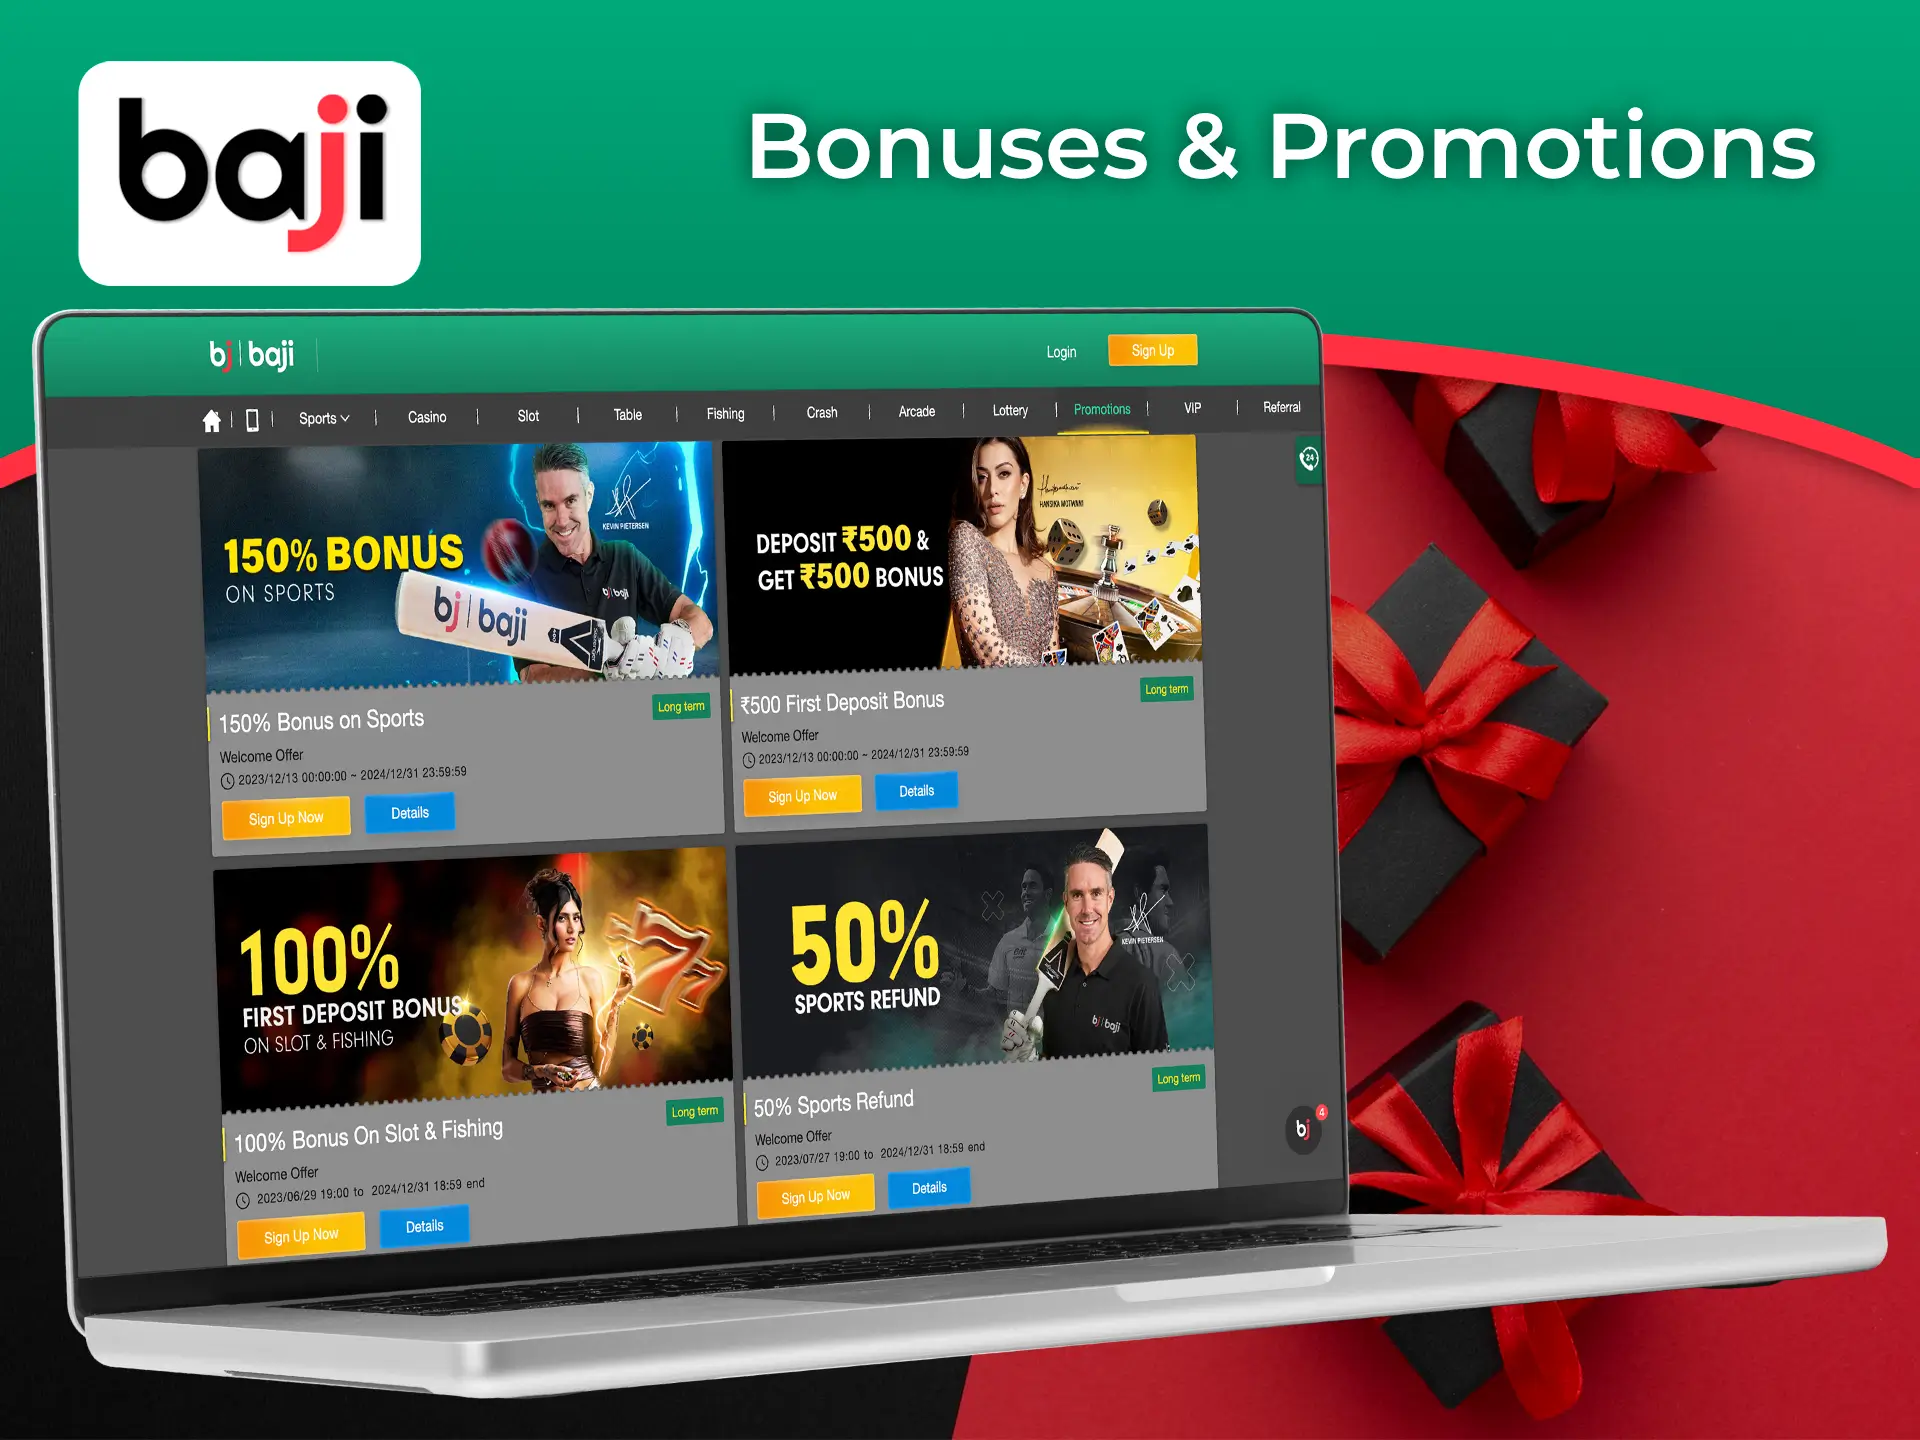 As soon as you sign up with Baji, you get the opportunity to take advantage of the company's bonuses.